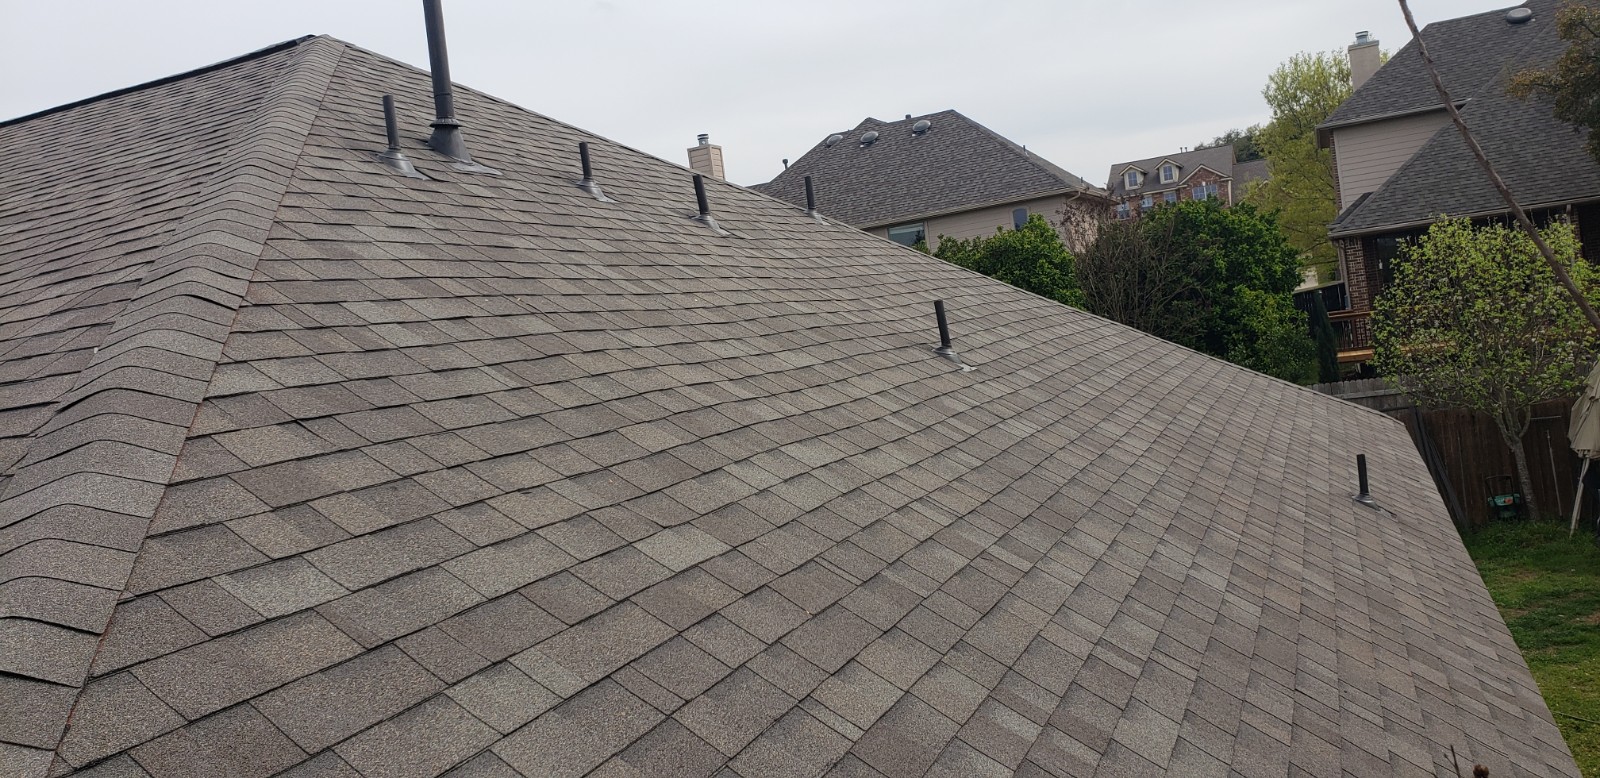 Roofing Metal & Shingle Right Source Roofing & Construction San Antonio